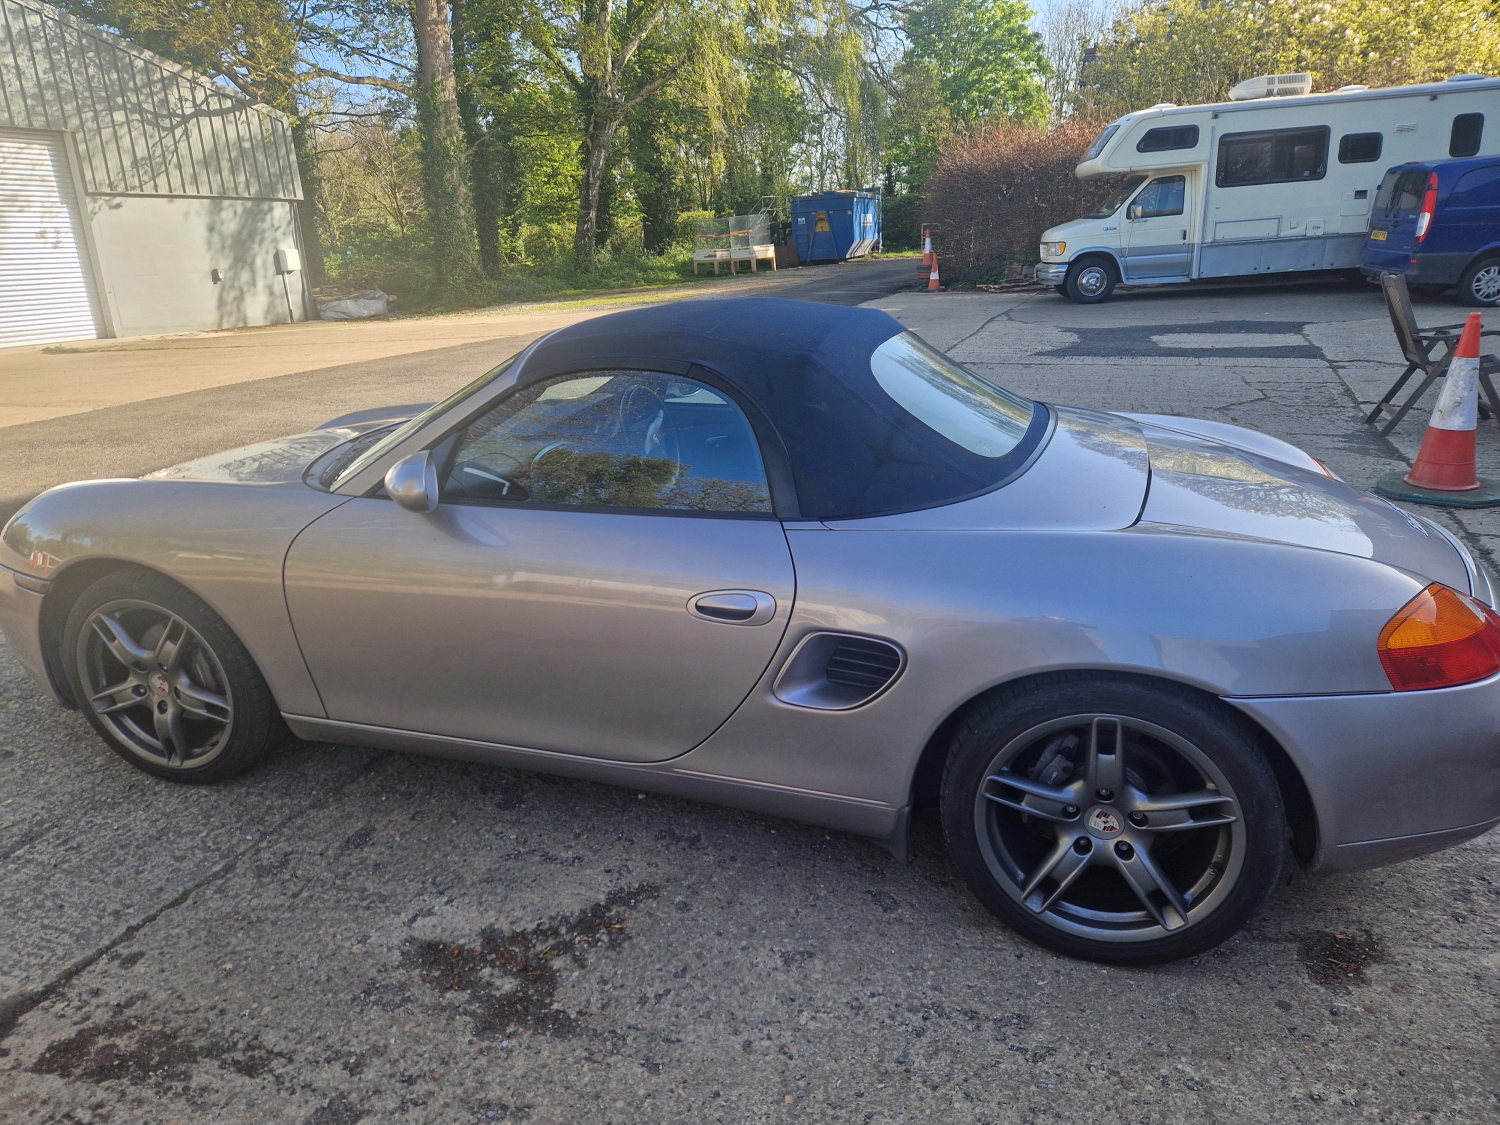 PORSCHE BOXTER CONVERTIBLE 2002. 129,000 MILES. NEW MOT. MUCH SERVICE HISTORY, OWNERS MANUAL. GOOD - Image 4 of 7